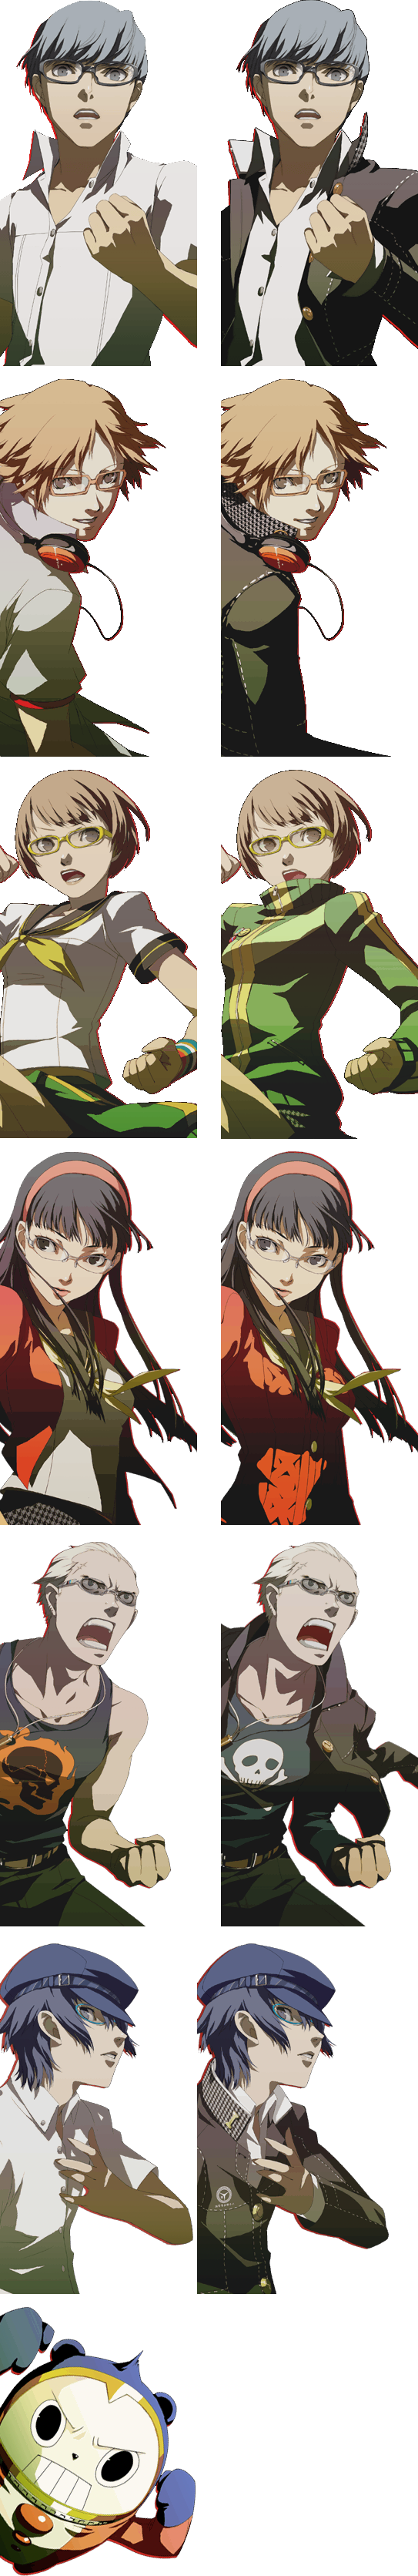 Persona 4 - 3- and 4-Panel All Out Attack